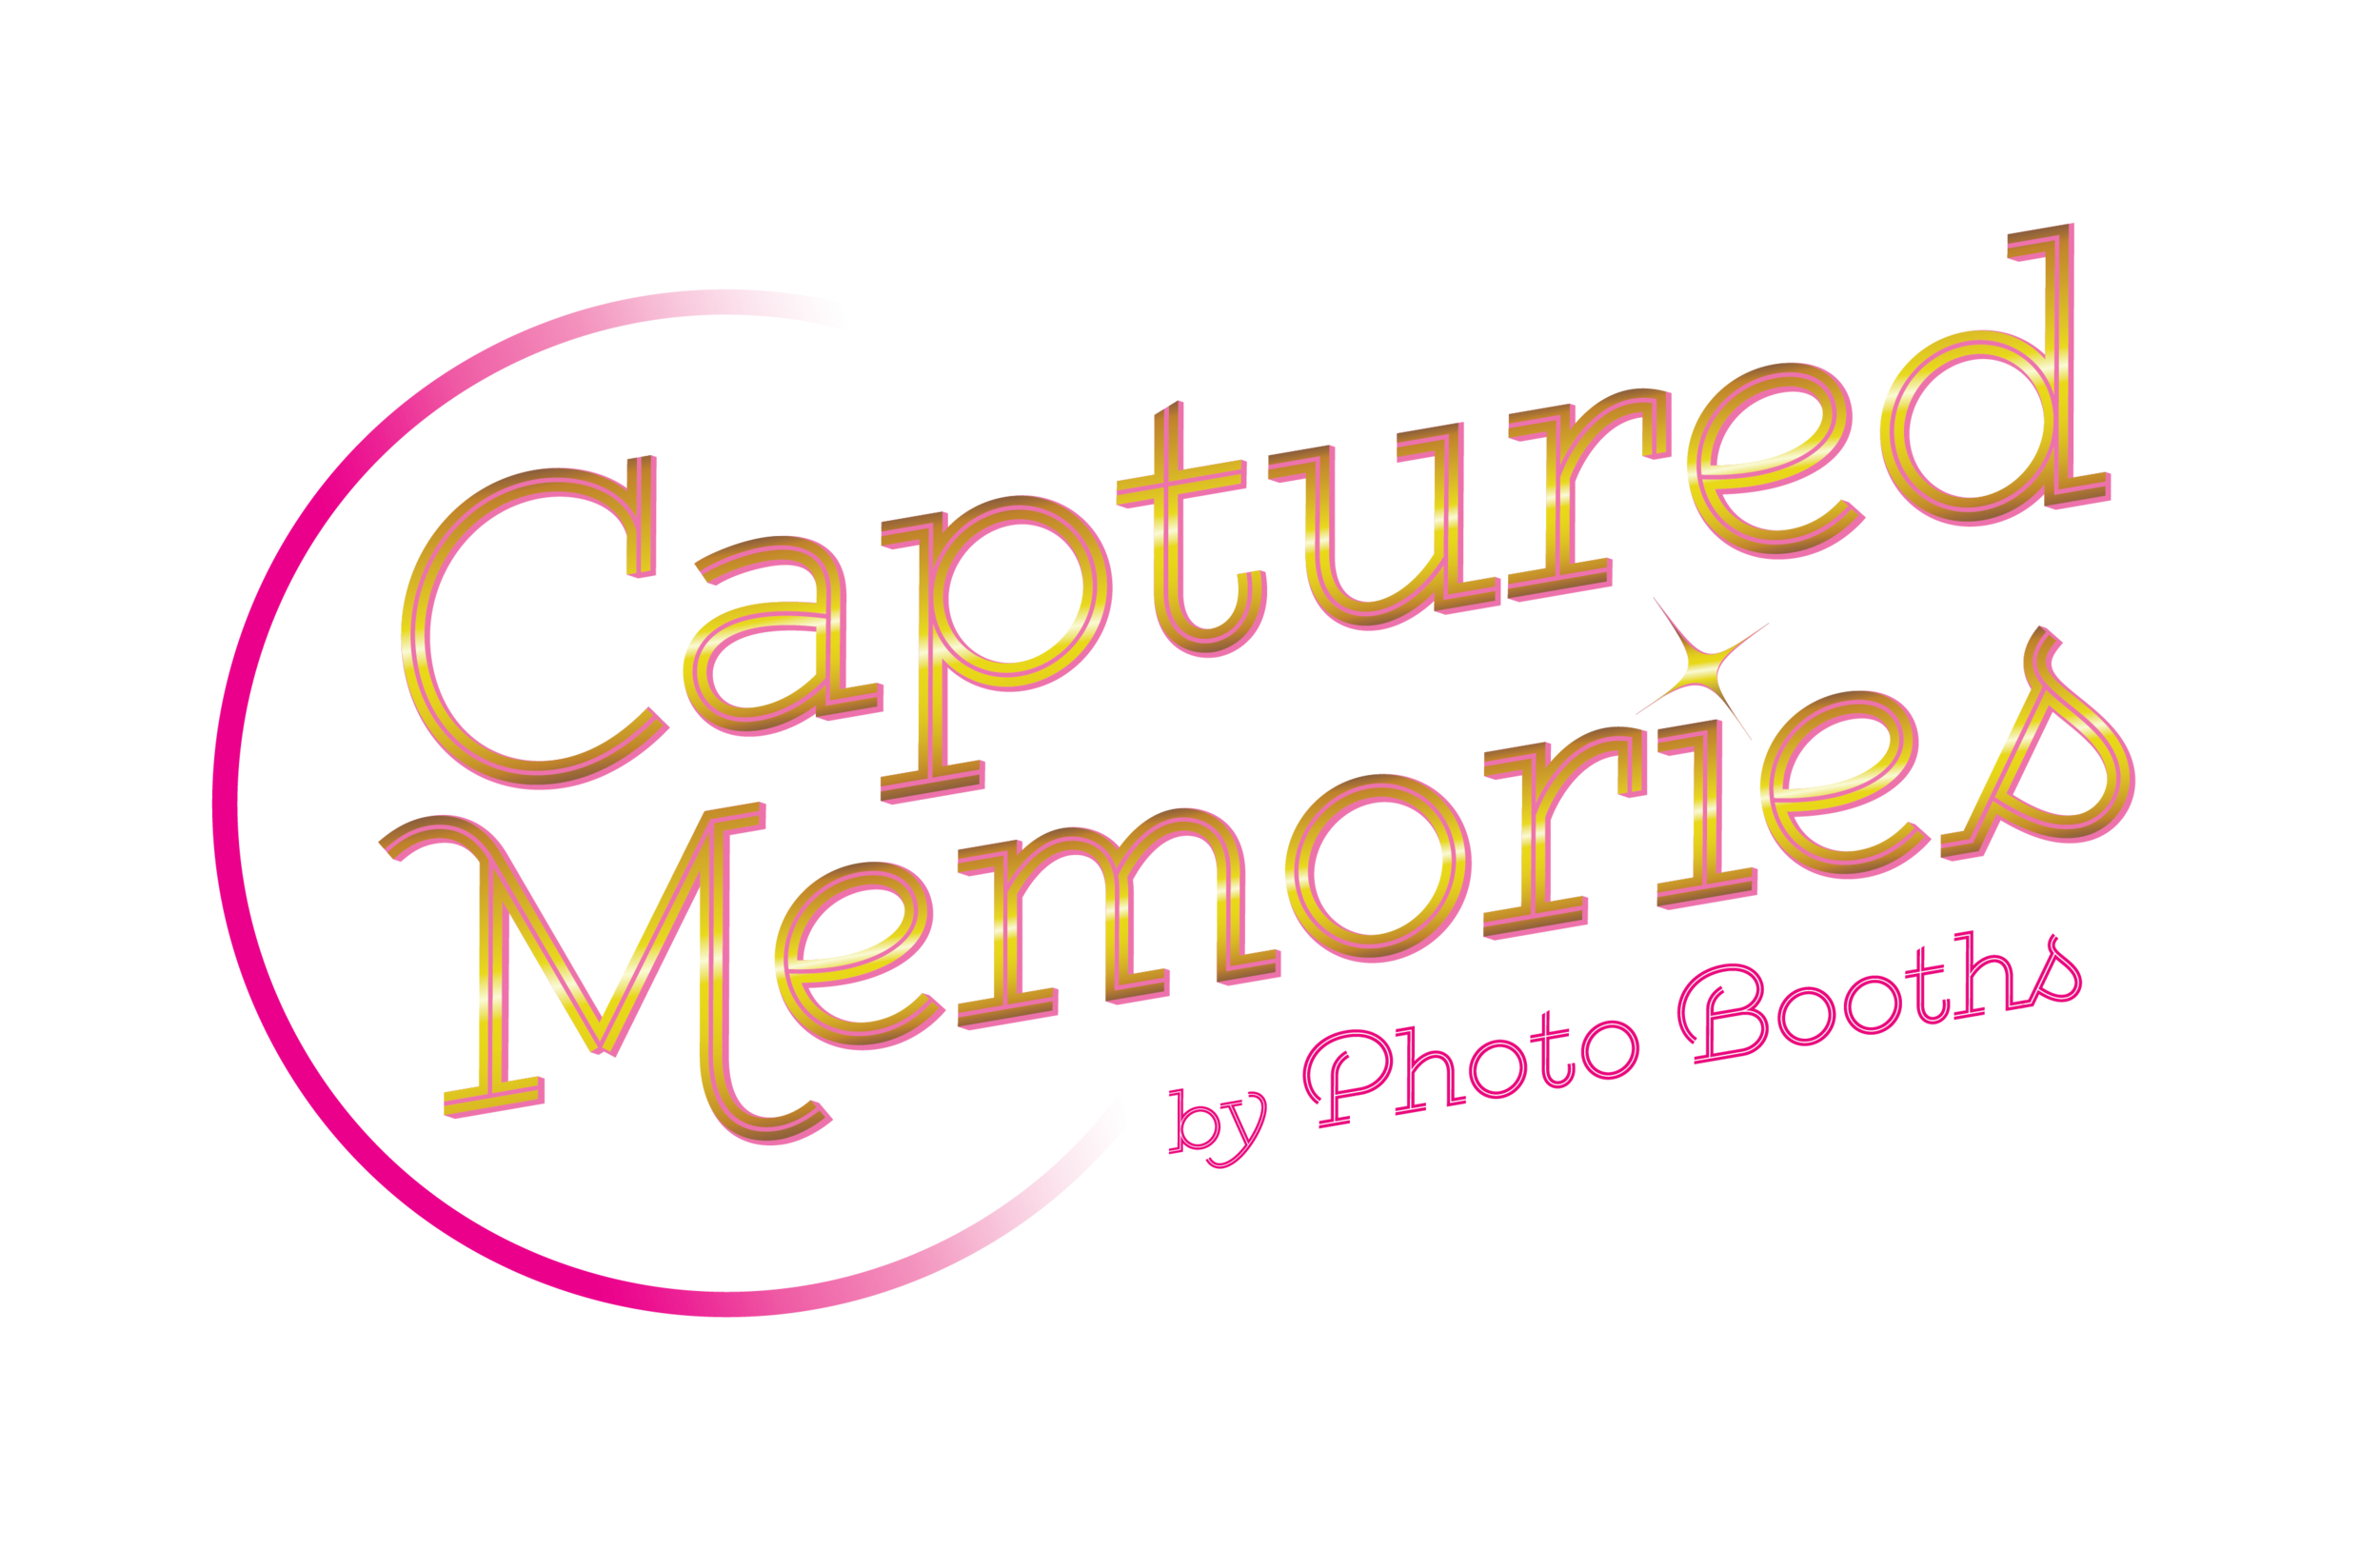 Captured Memories by Photo Booth